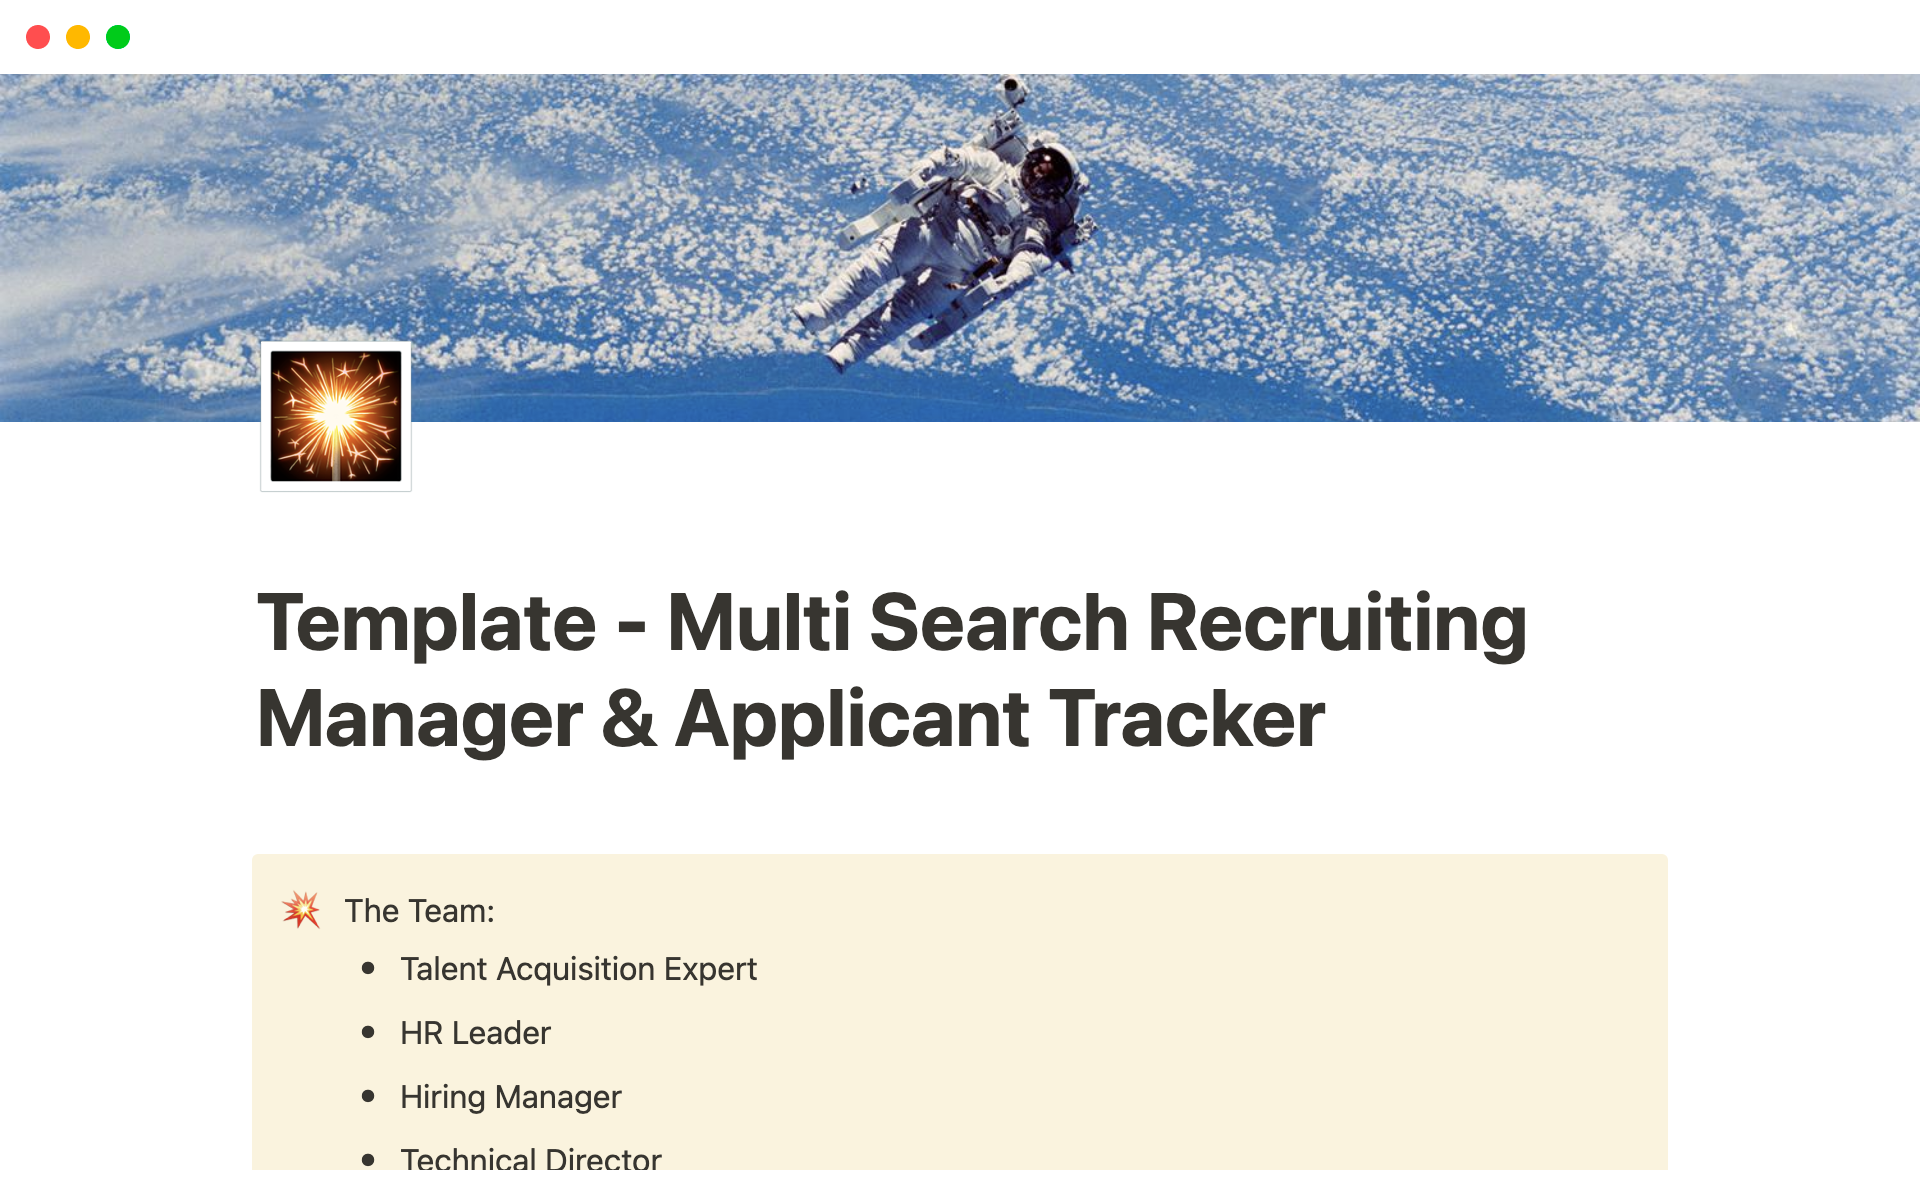 Recruiting project manager and applicant tracker.